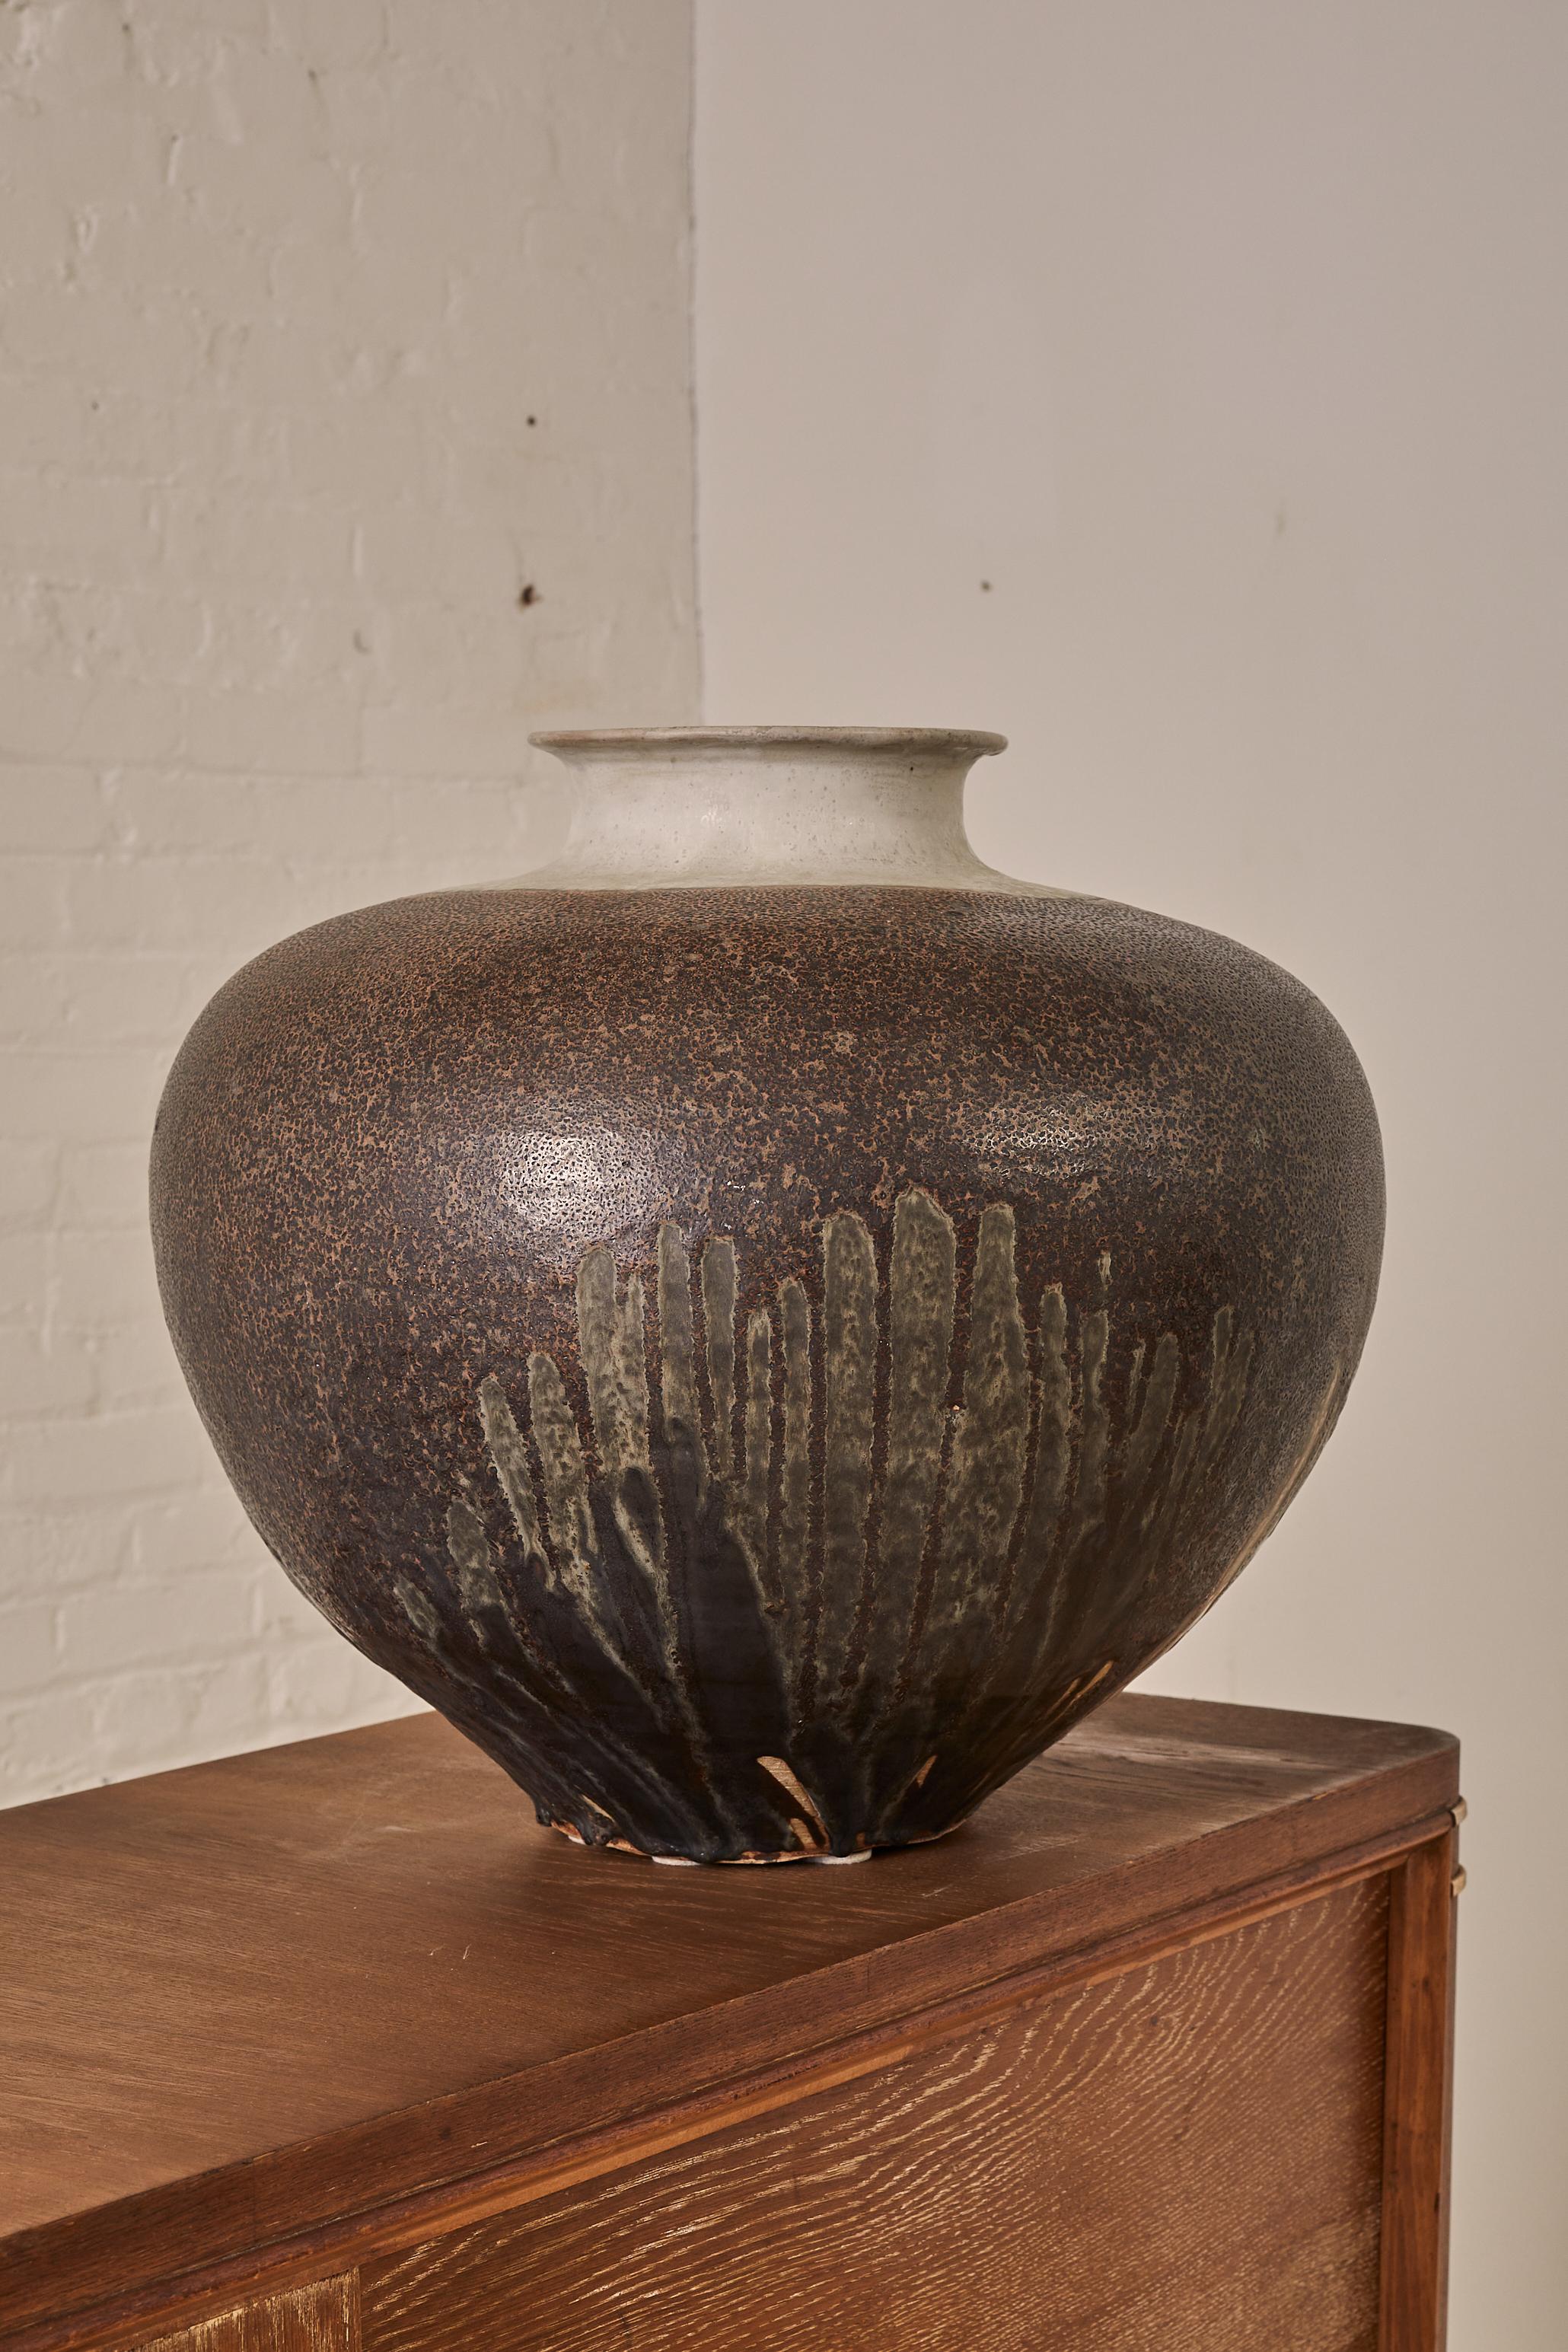  Stoneware Jardiniere by Paul Chaleff with a speckled glaze.  It is marked with the artist's incised signature and date (2005)

